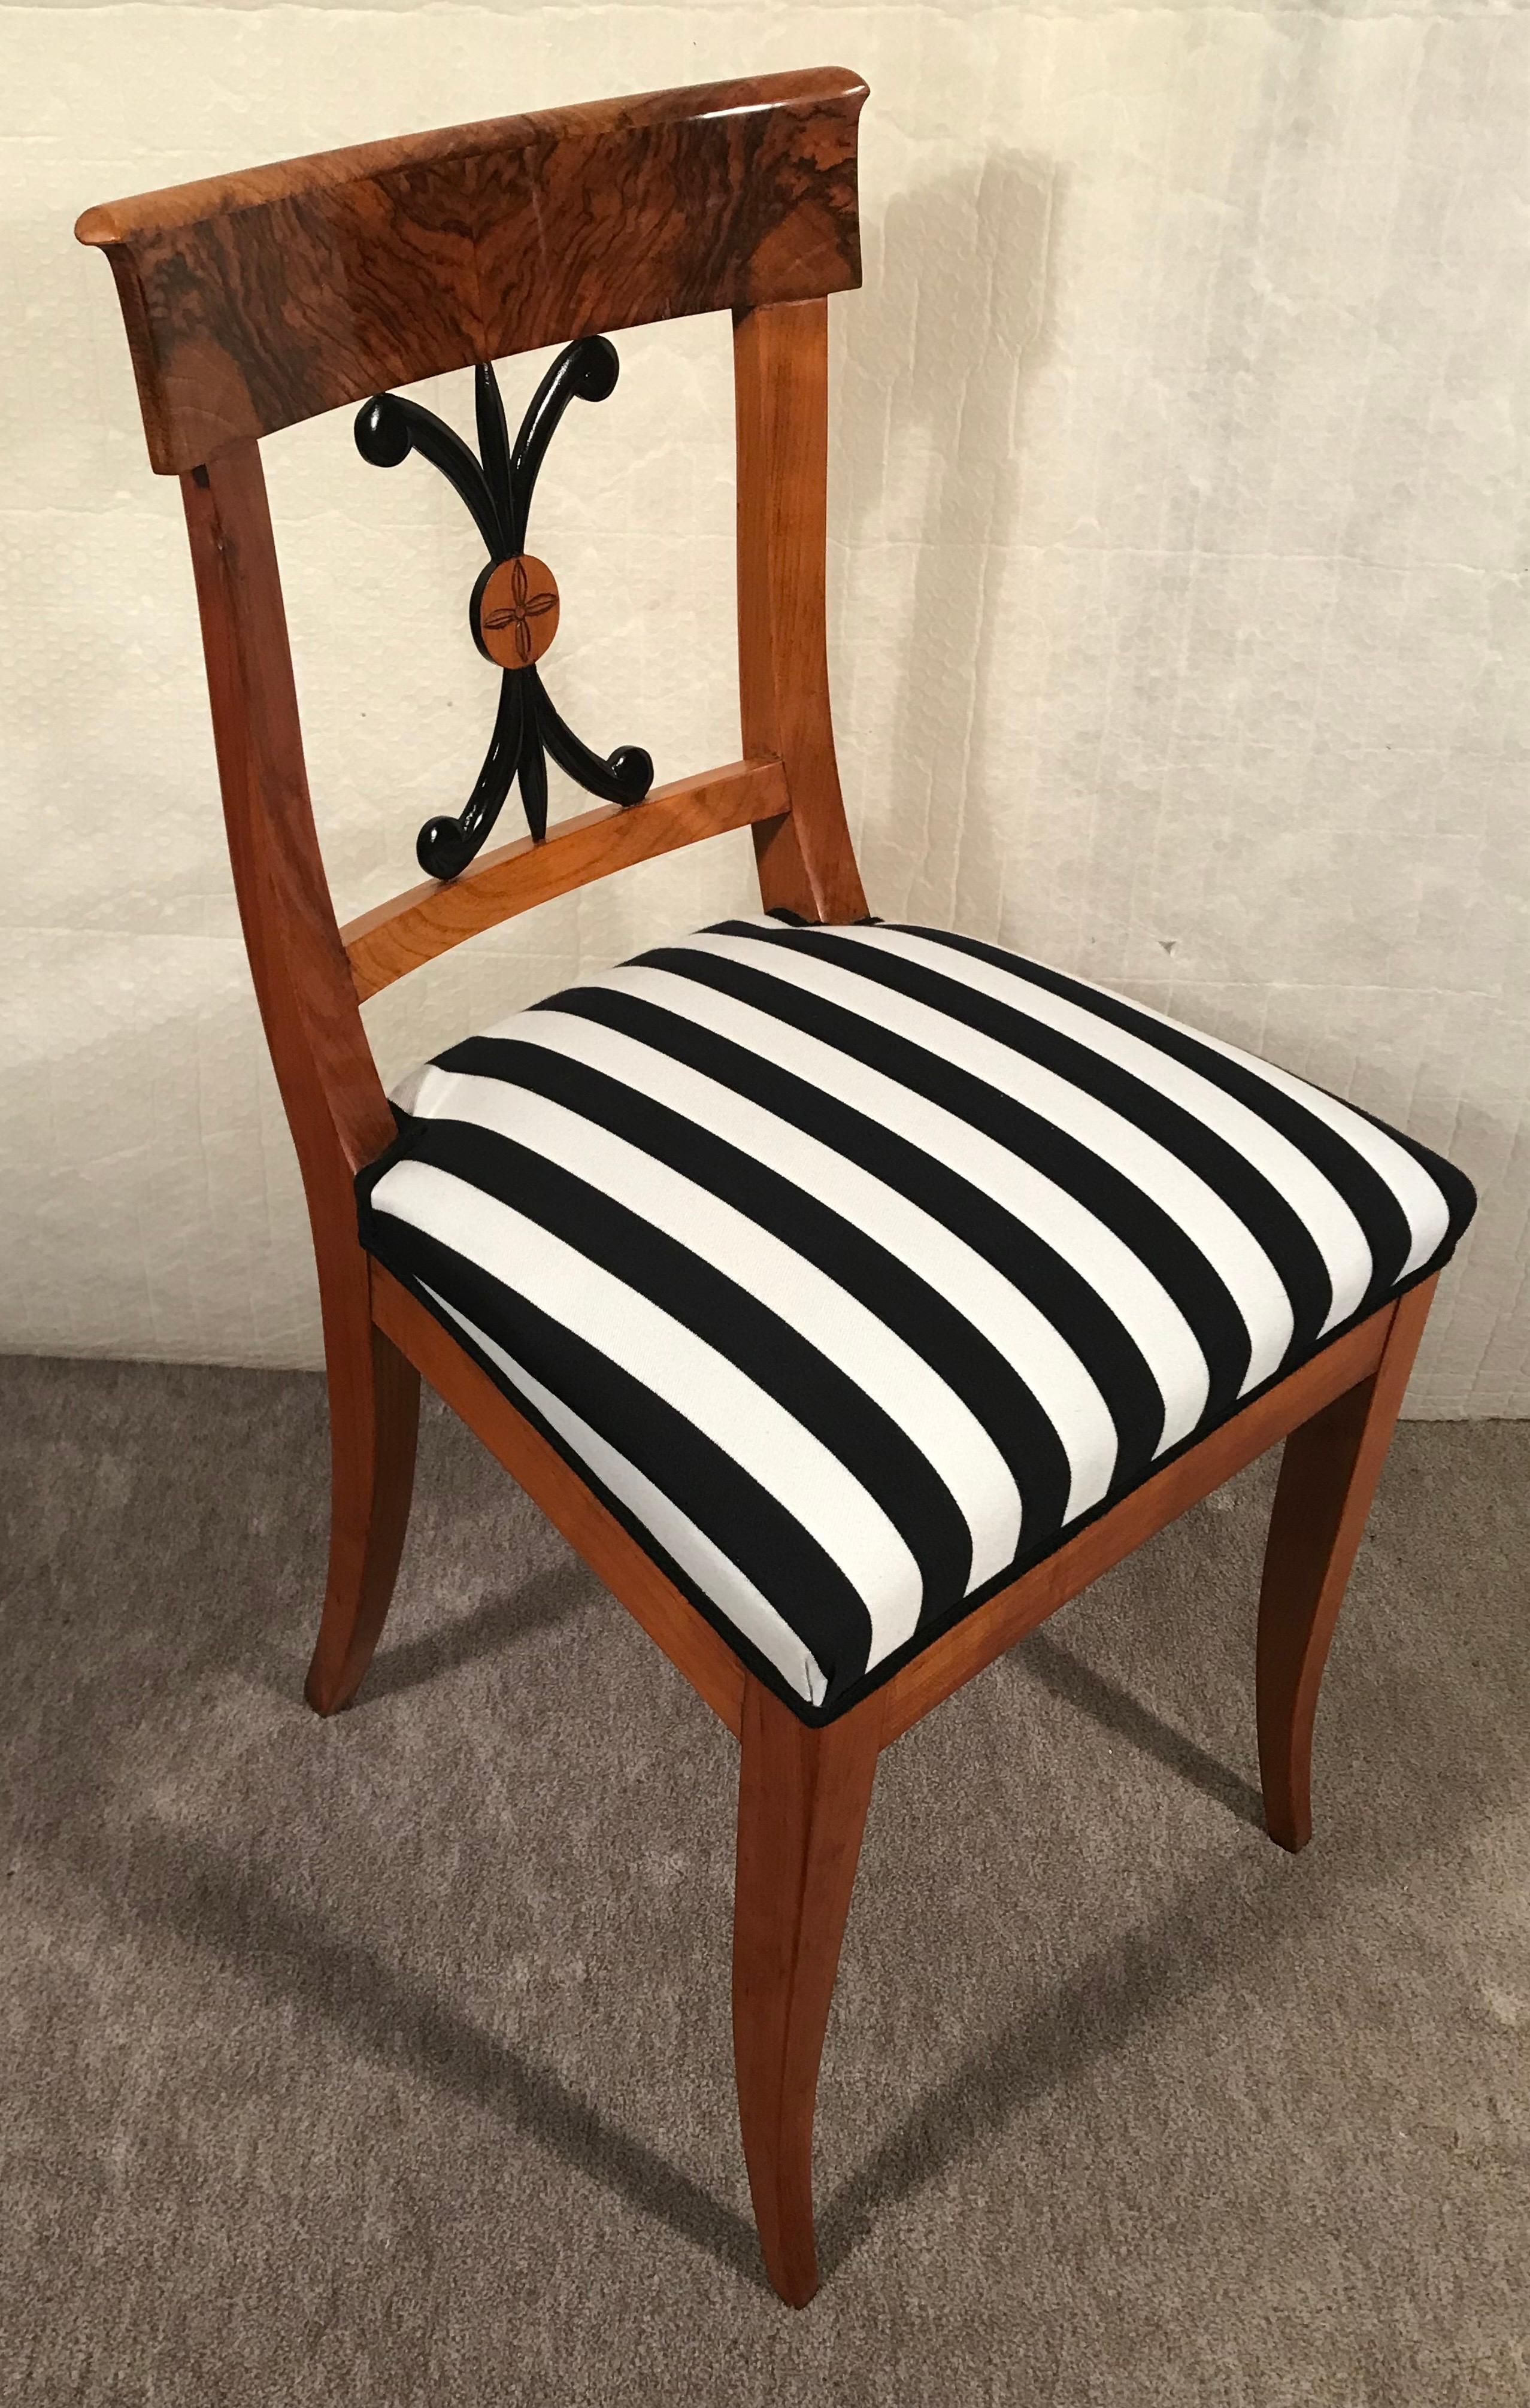 This original set of four Biedermeier chairs stands out for its beautiful walnut veneer. The backrest has beautiful open work decoration. The chairs are refinished with a shellac hand polish and have a new upholstery with a very pretty fabric.
This